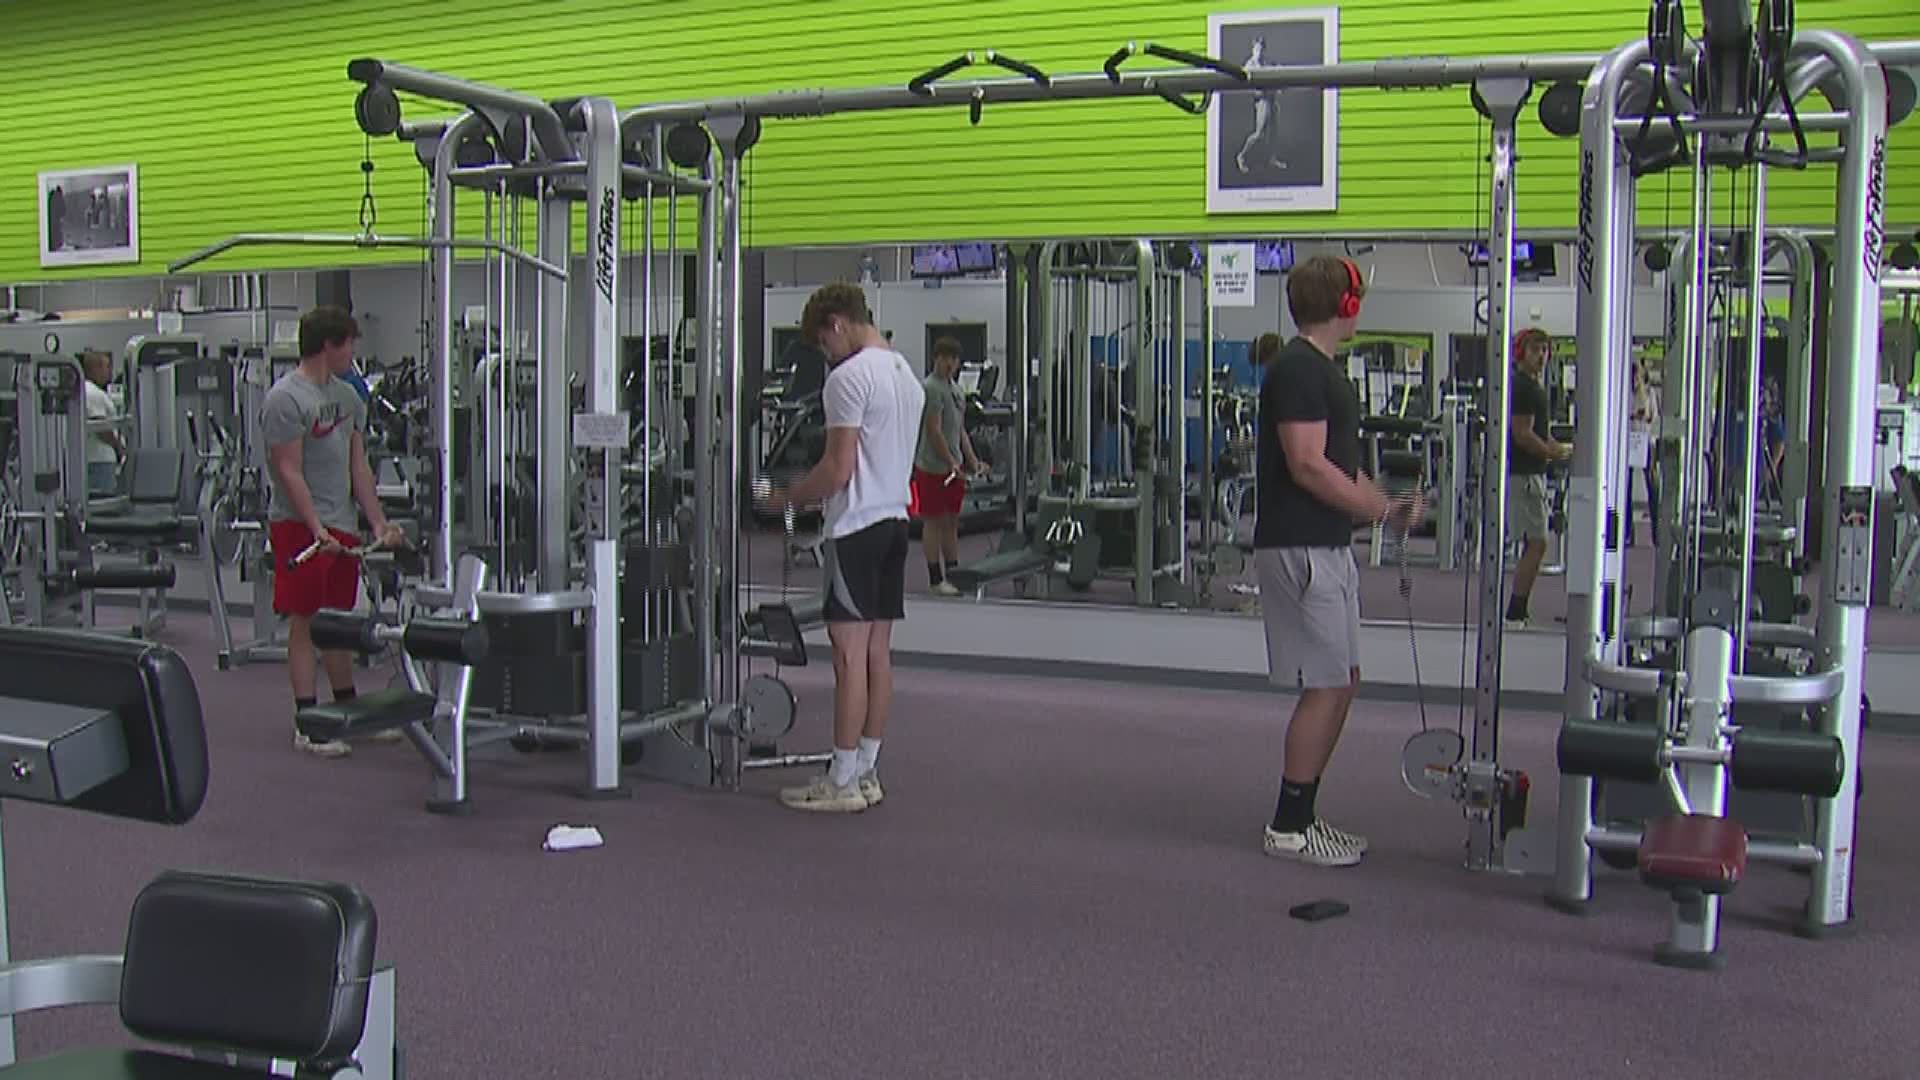 Despite open doors, some demographics are hesitant to get back in the gym